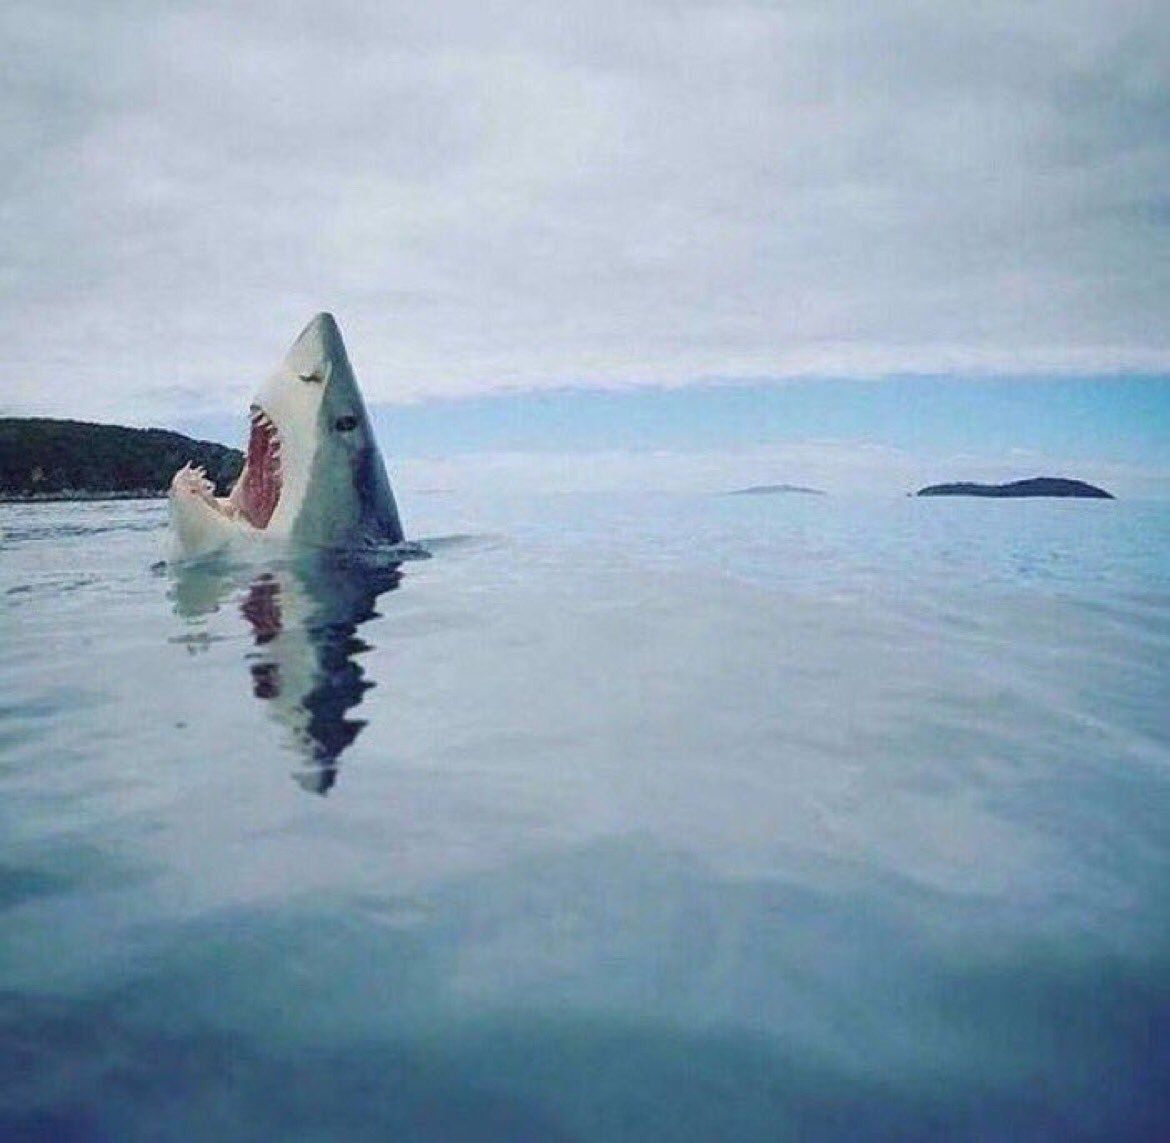 A shark stepping on a piece of lego.